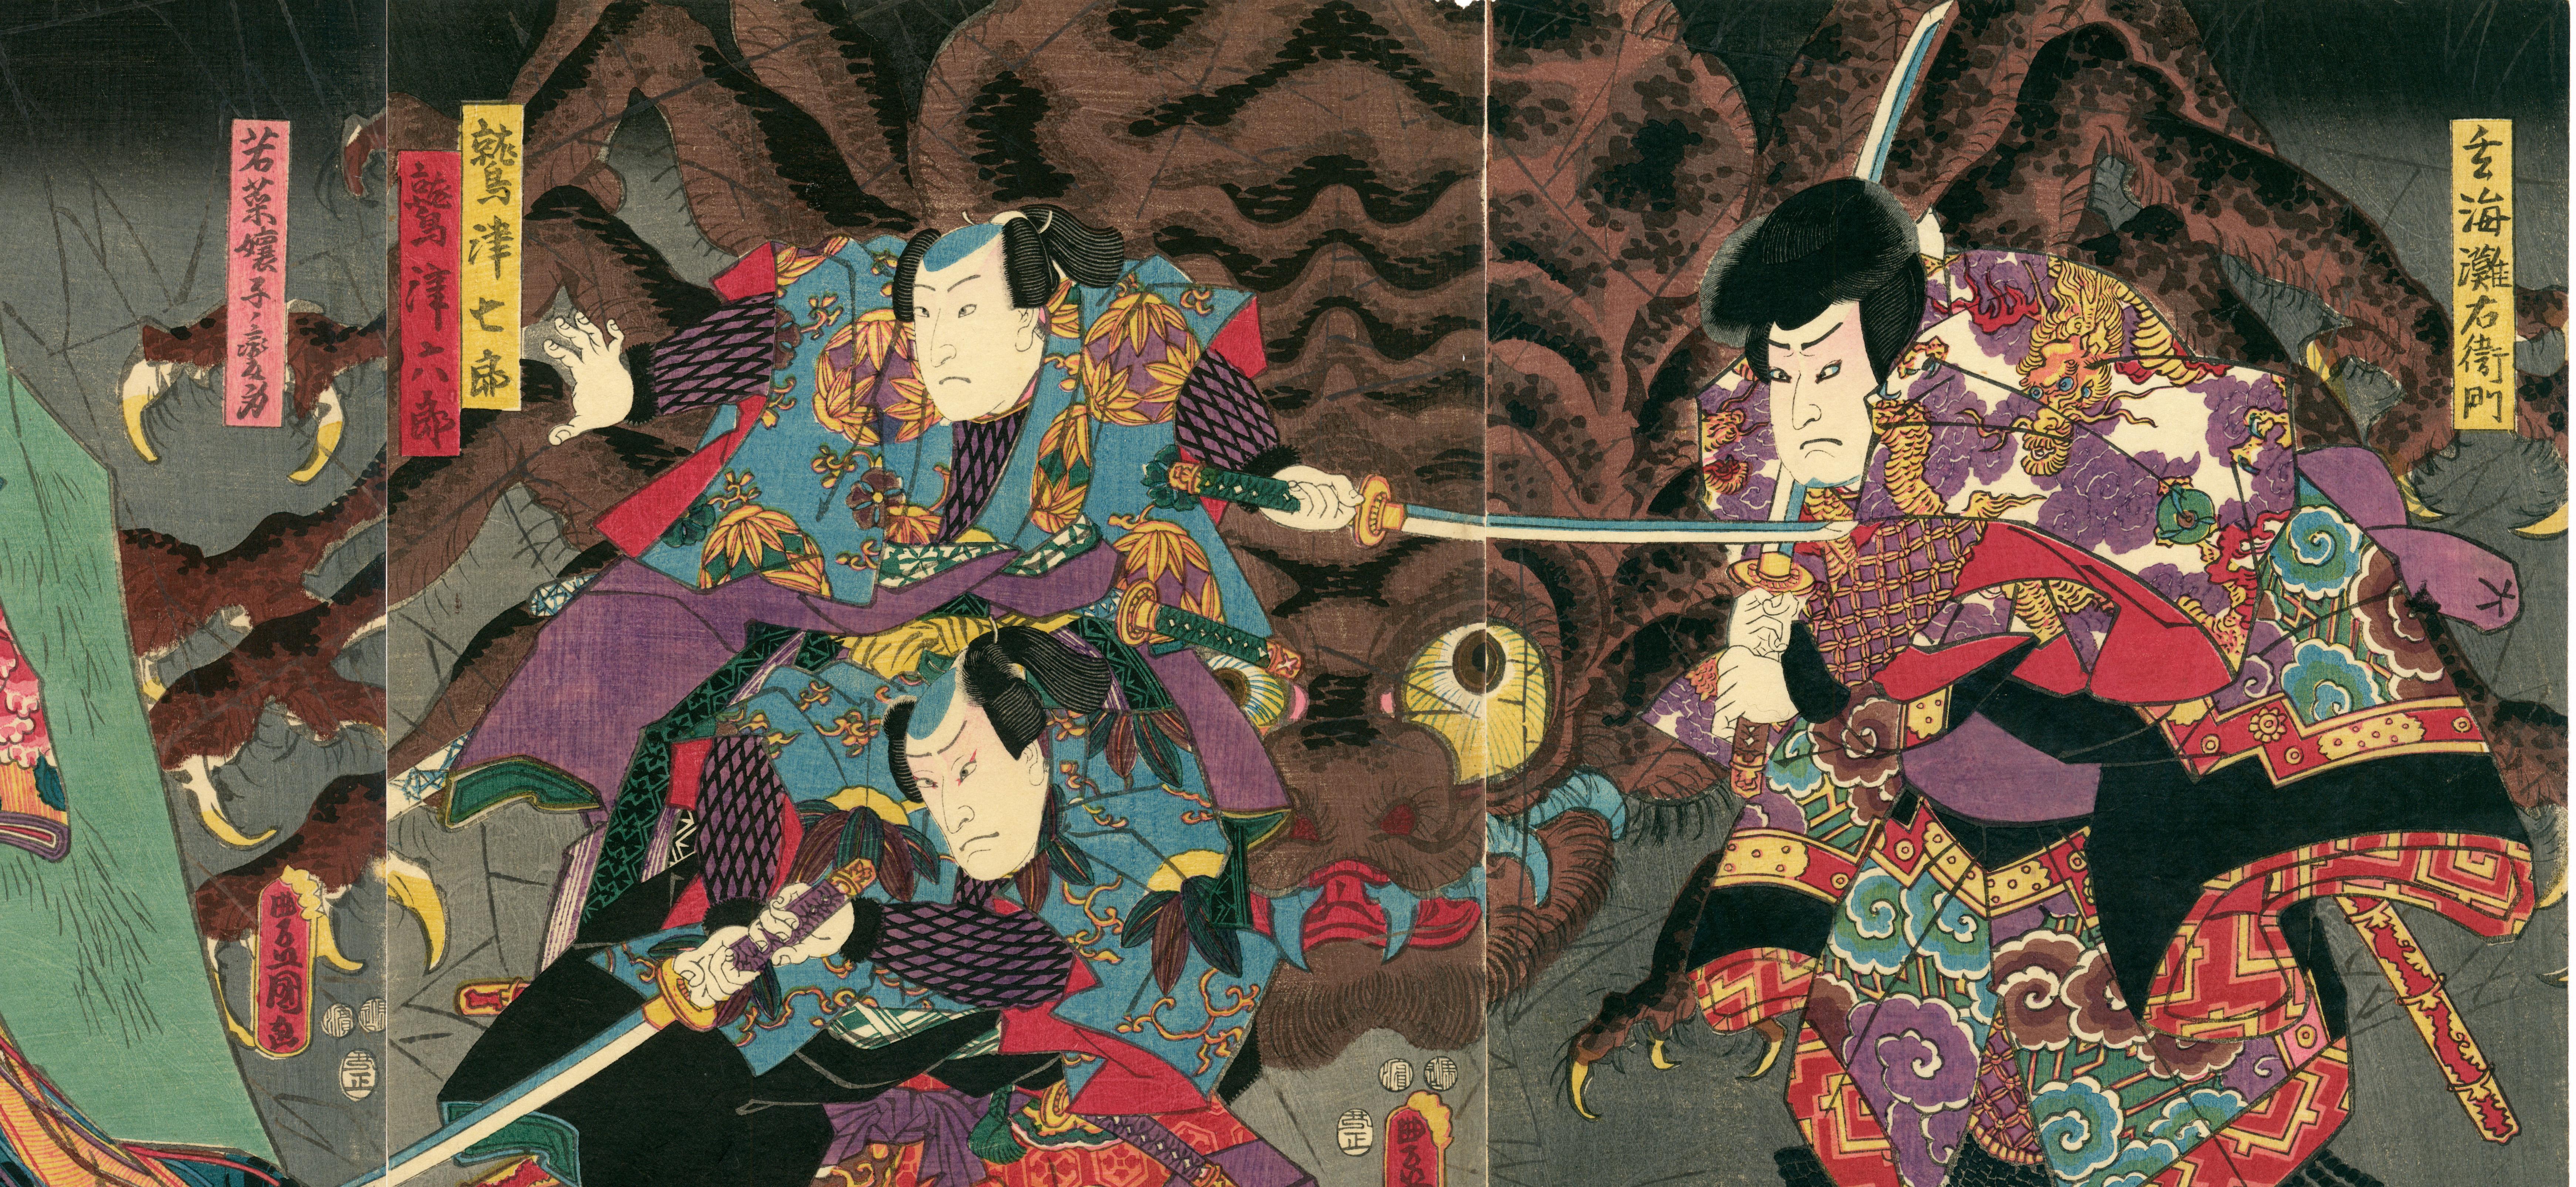 The Tale of Shiranui (Shiranui Monogatari) was an epic illustrated gôkan comic book that was published between 1849 and 1855. The tale revolves around the clash between the Kikuchi and Ôtomo clans. Princess Wakana is given the power of spider magic